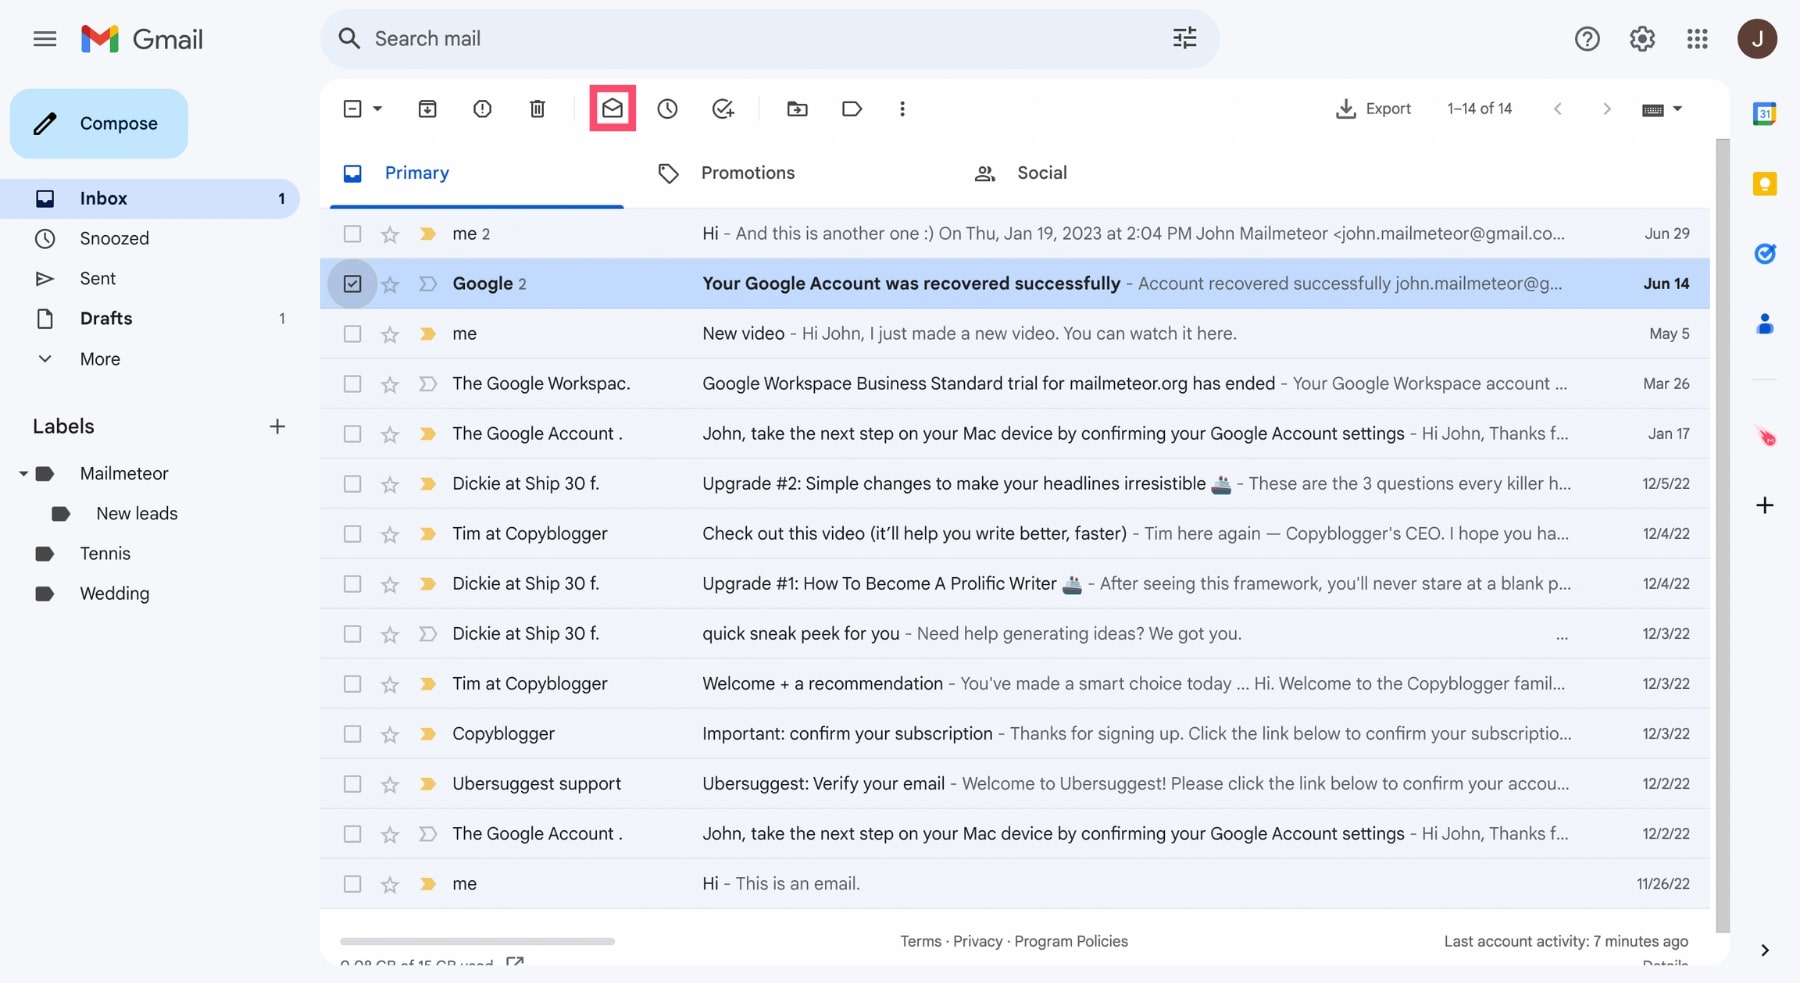 Mark email as read in Gmail